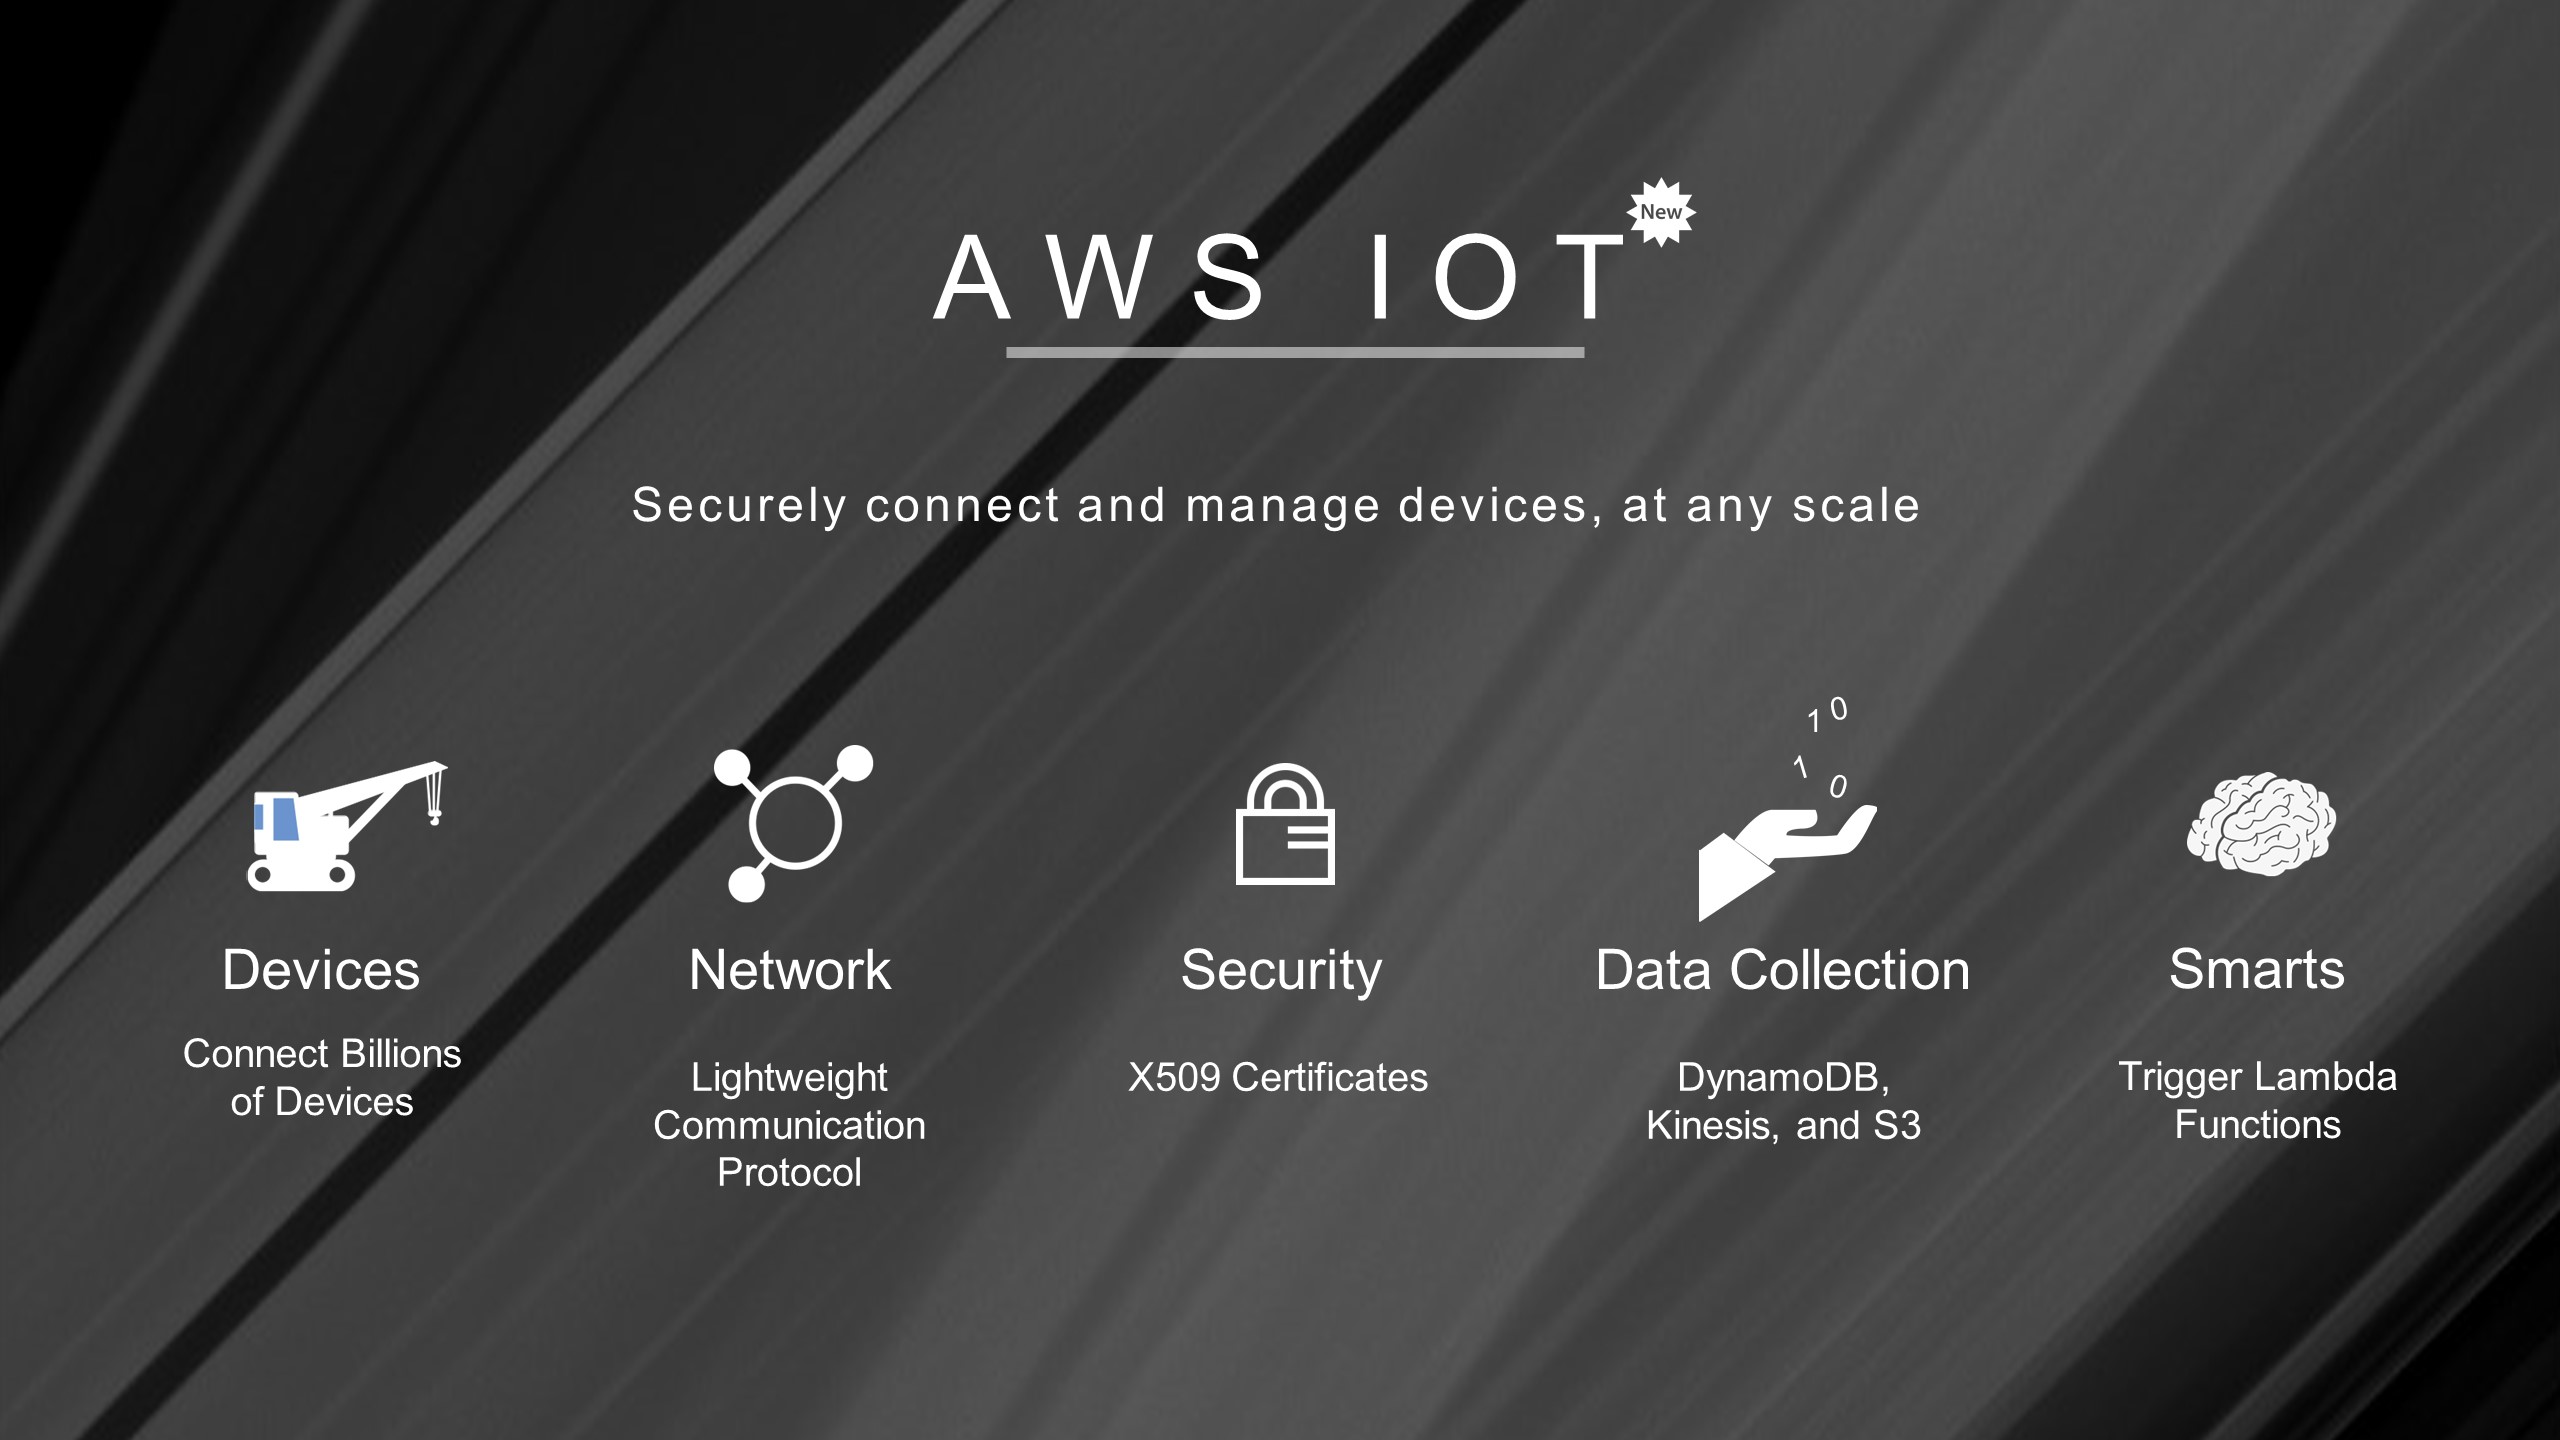 AWS IoT is a managed cloud platform to connect with cloud applications and other devices